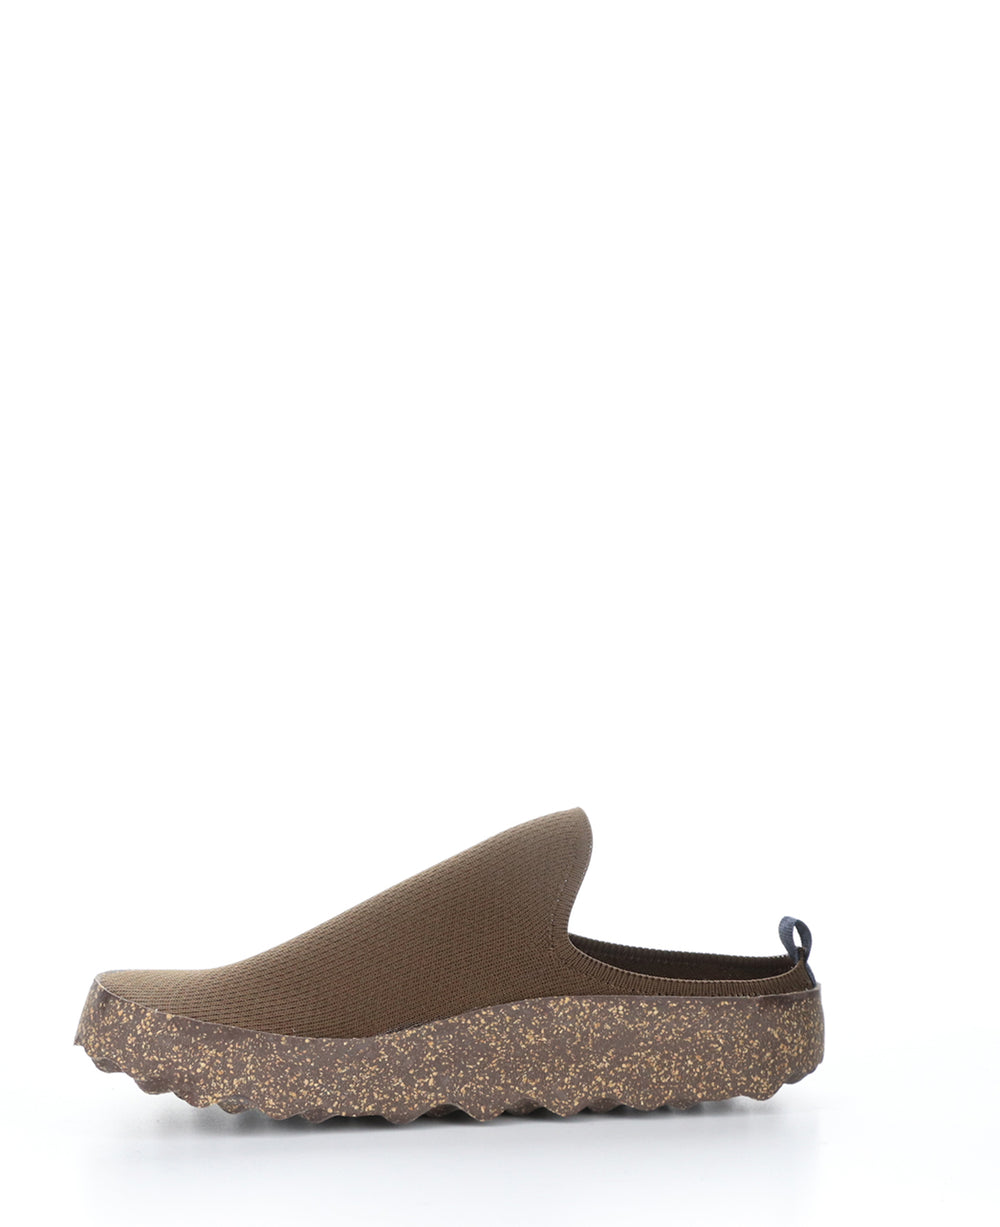 CLOG105ASPM BROWN Slip-on Shoes|CLOG105ASPM Chaussures à Bout Rond in Marron